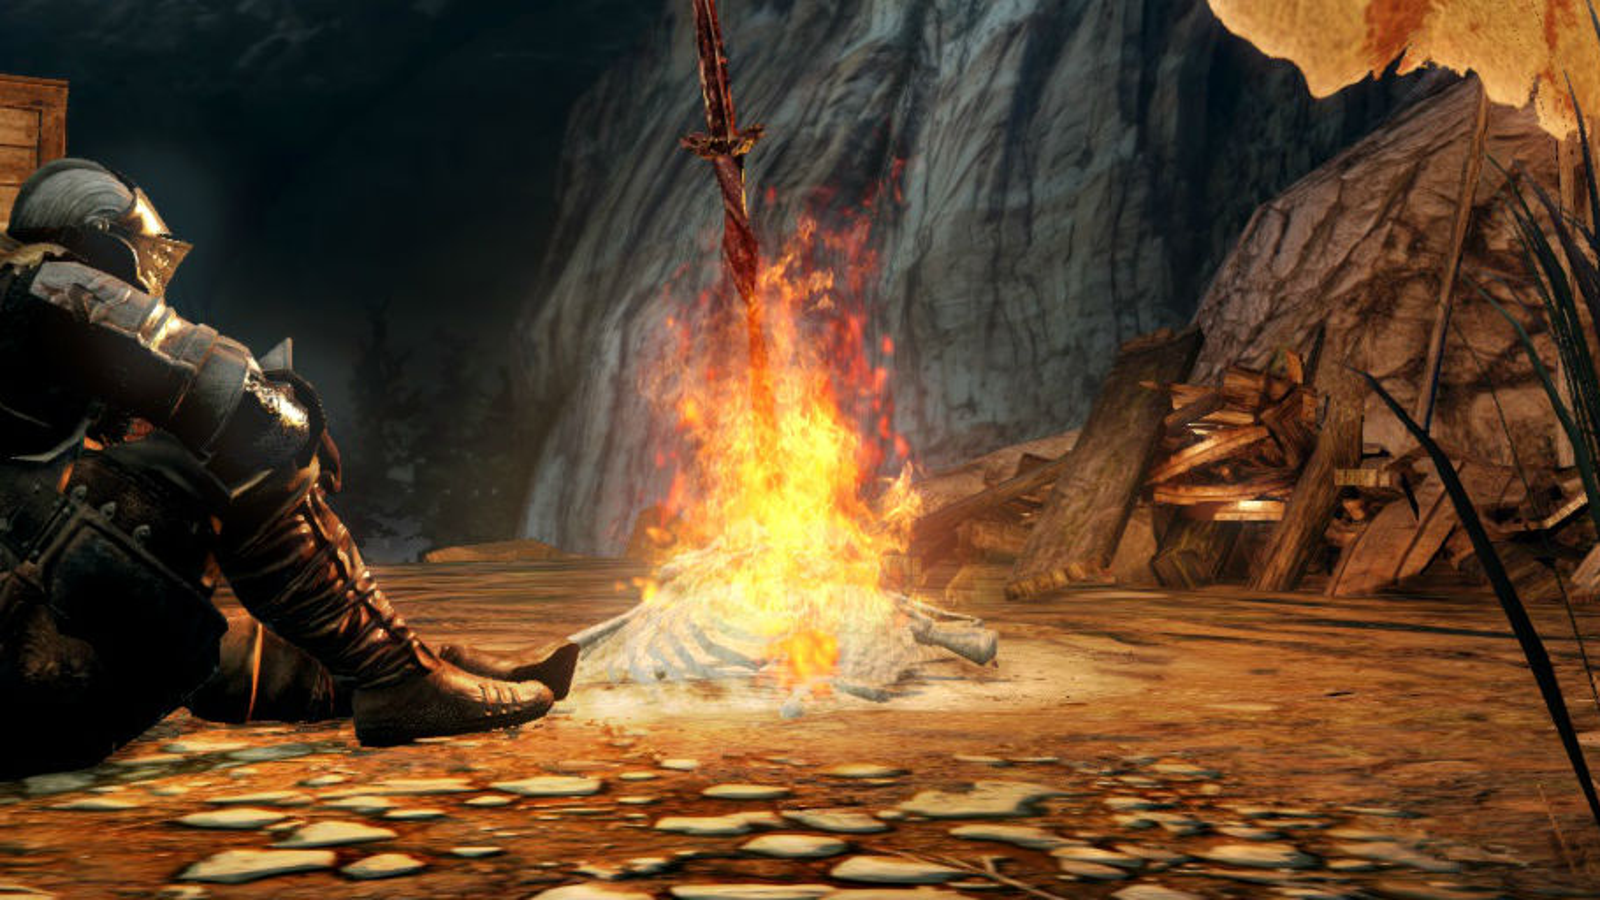 Dark Souls 2 Guide: The Doors of Pharros and How to Defeat the Royal Rat  Authority